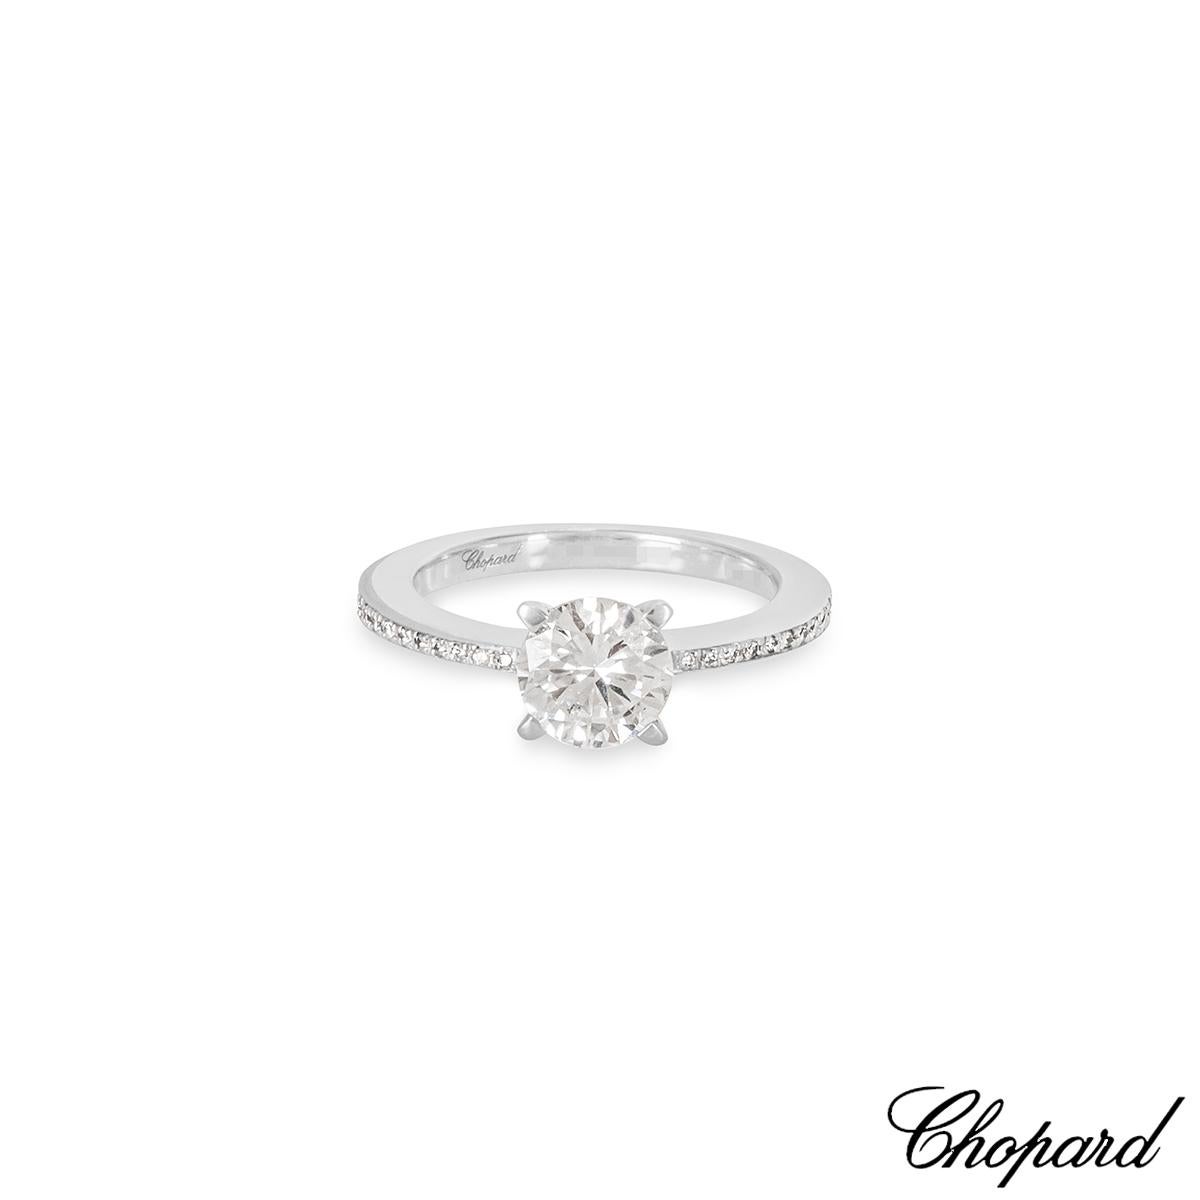 chopard engagement ring price